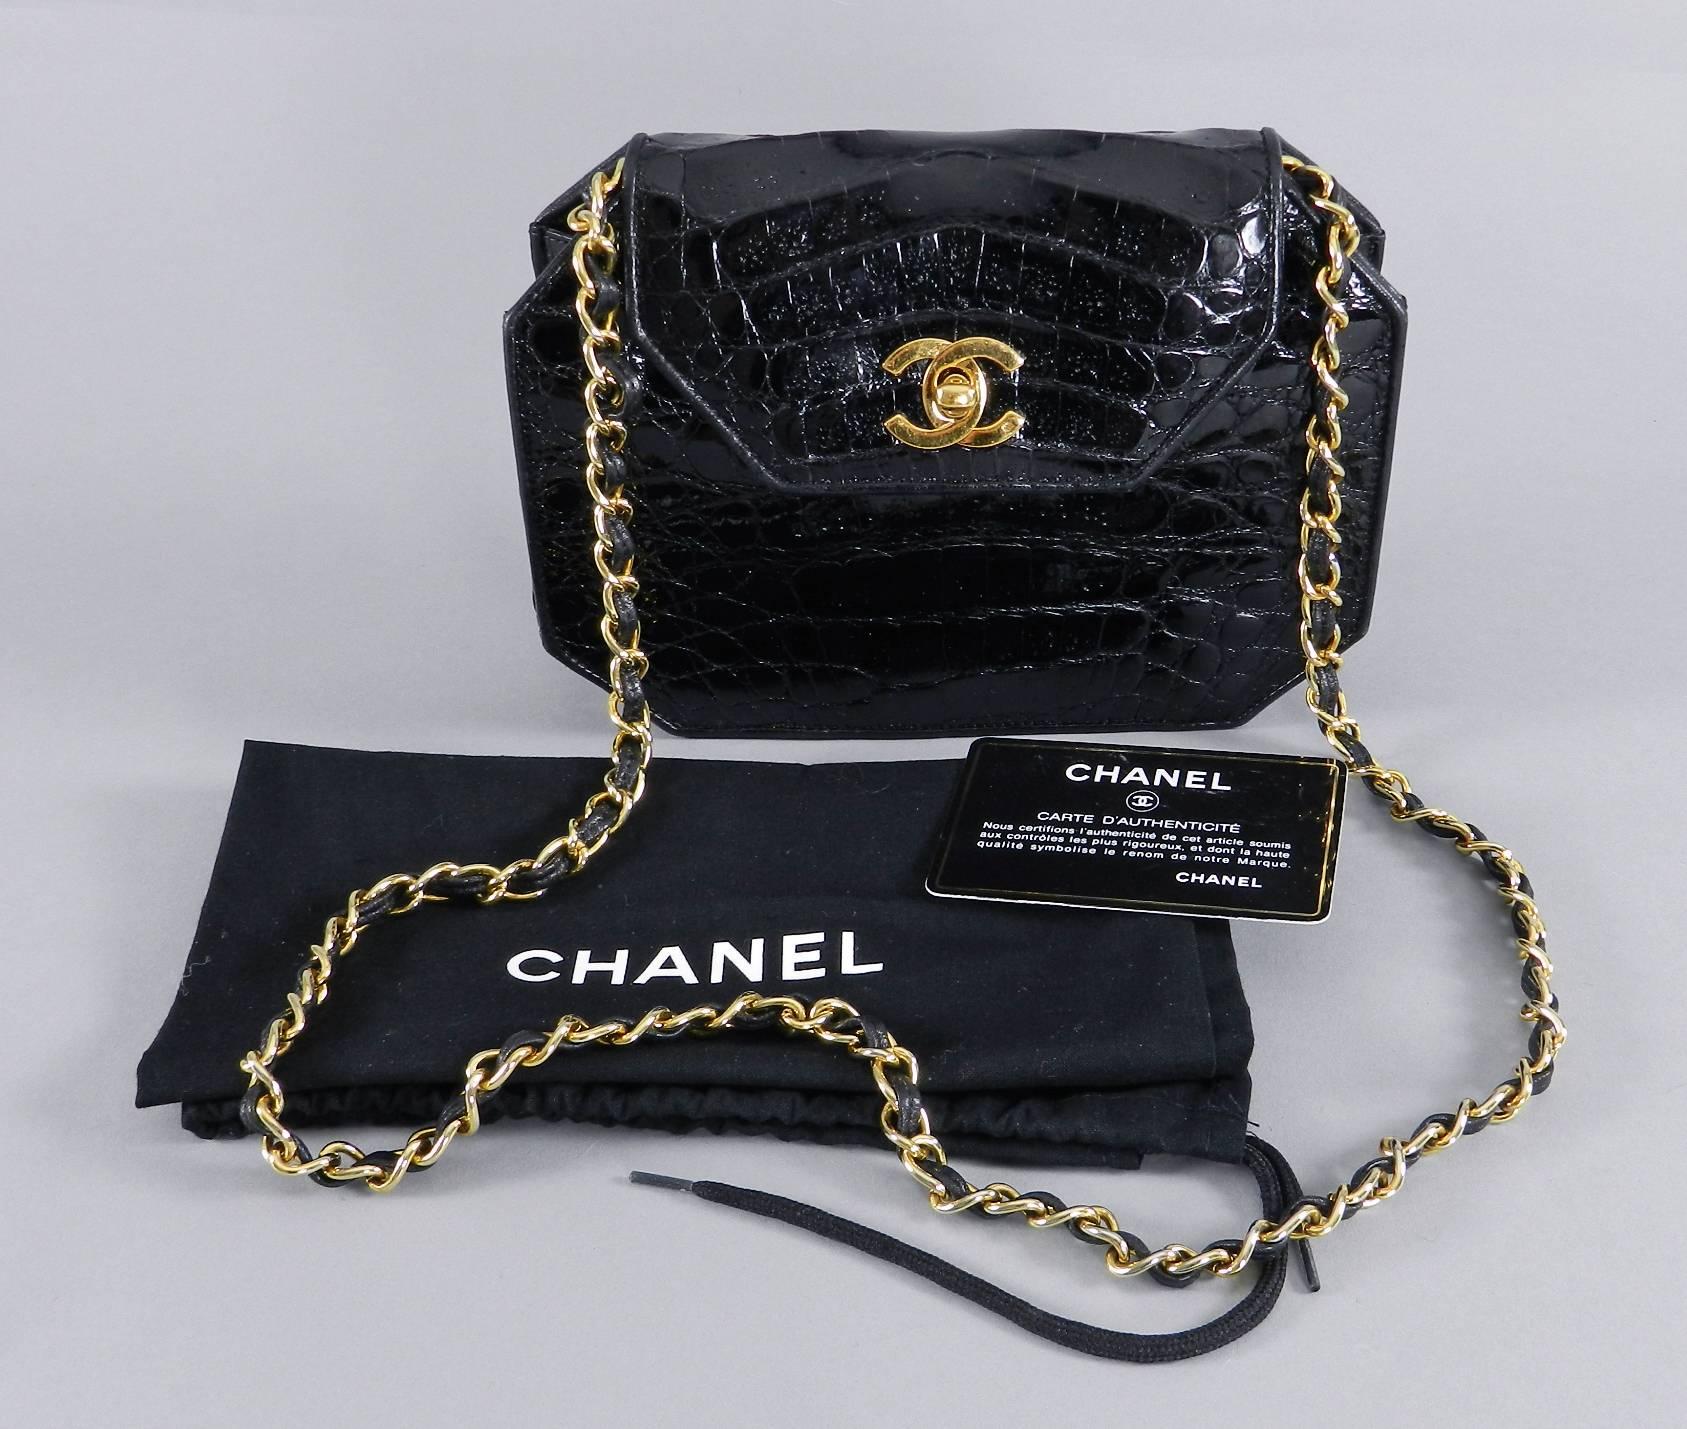 Chanel black crocodile octagonal purse with chain strap. Goldstone hardware with CC logo at front. Comes with original authenticity card and duster. Date code is 11 series for year 2006-2009.  Body of bag measures 7.5